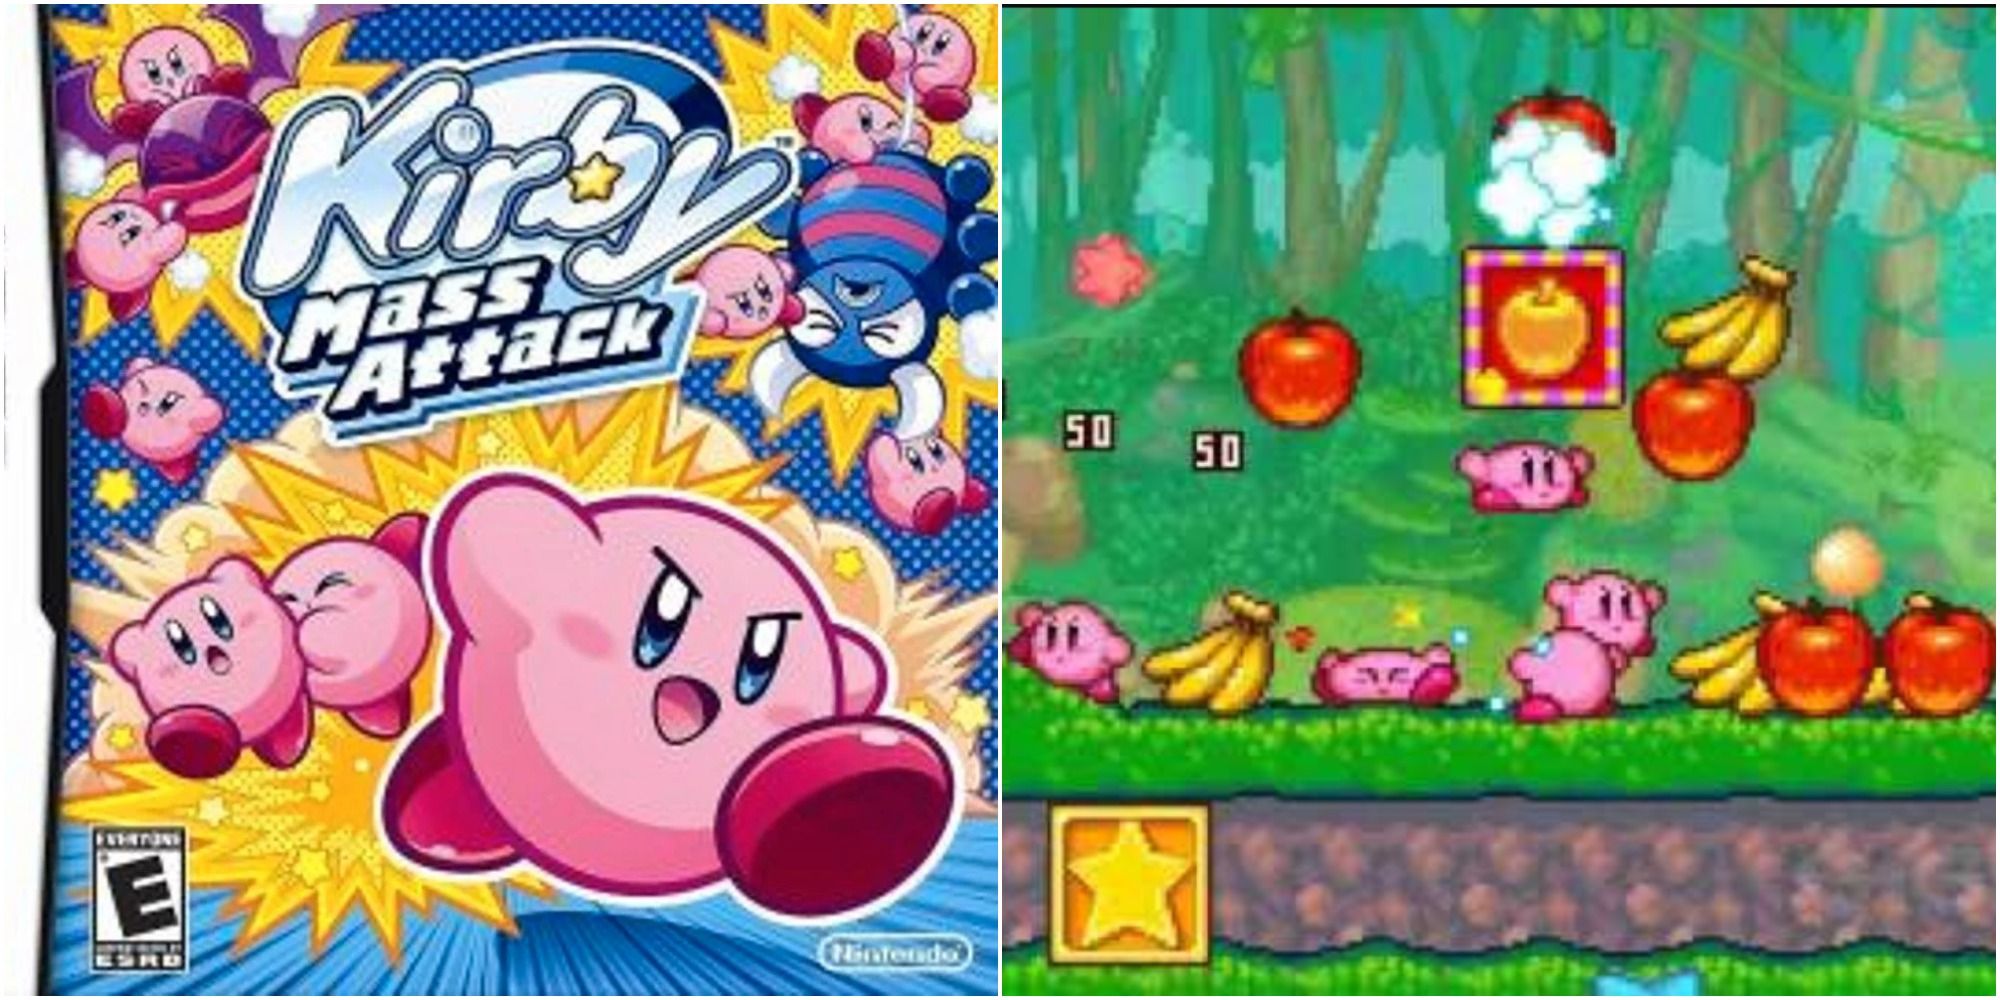 Kirby Mass Attack Cover Art ds nintendo game